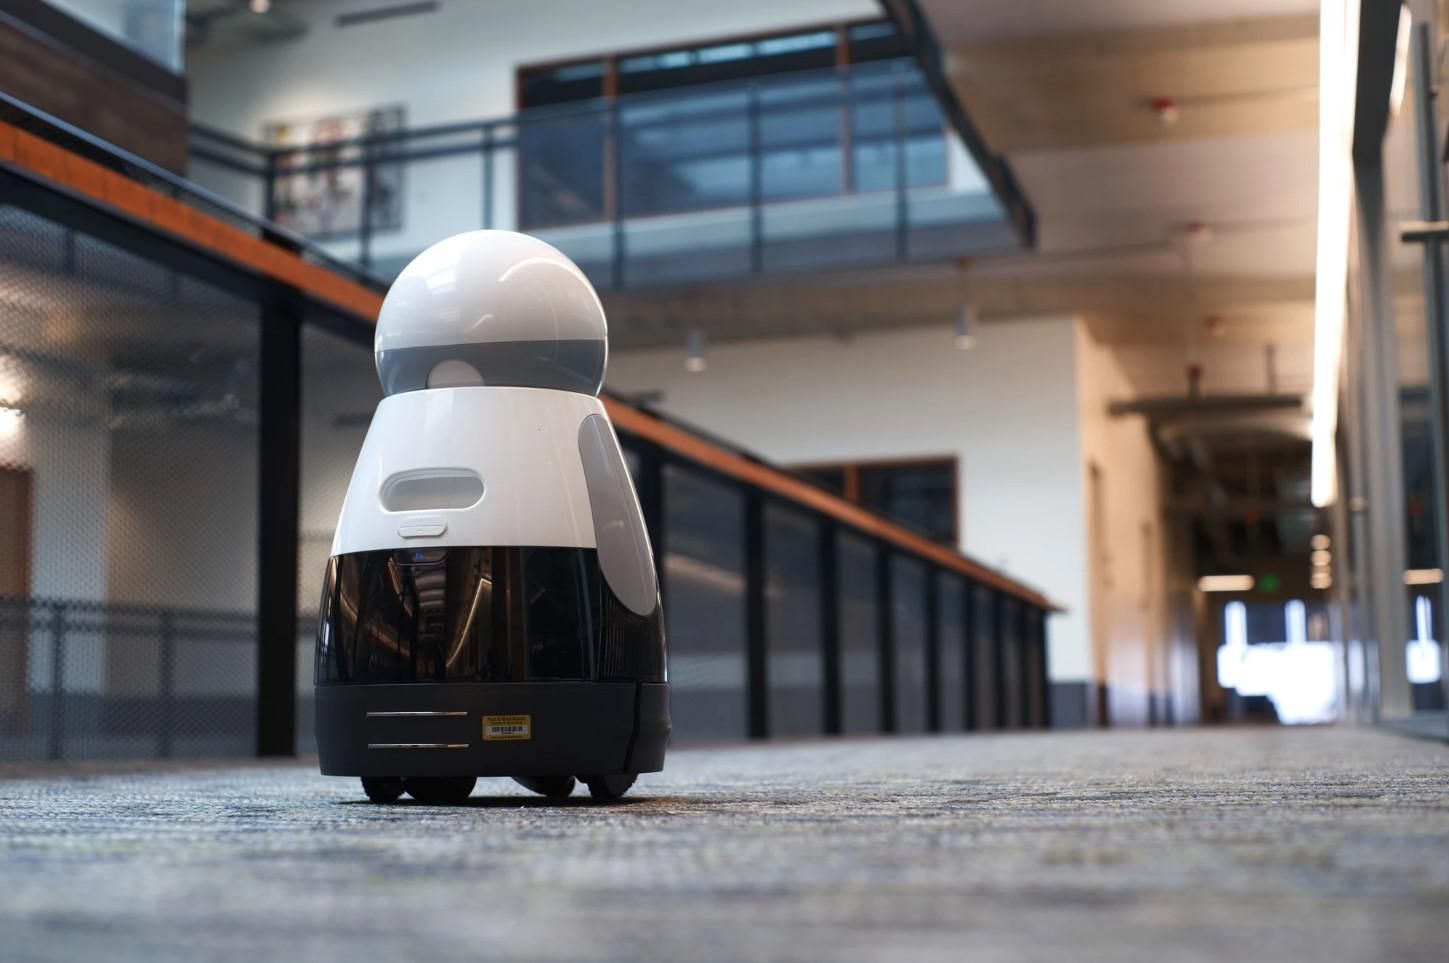 A small black and white wheeled robot with a round head with its back turned looks down a long and empty academic hallway